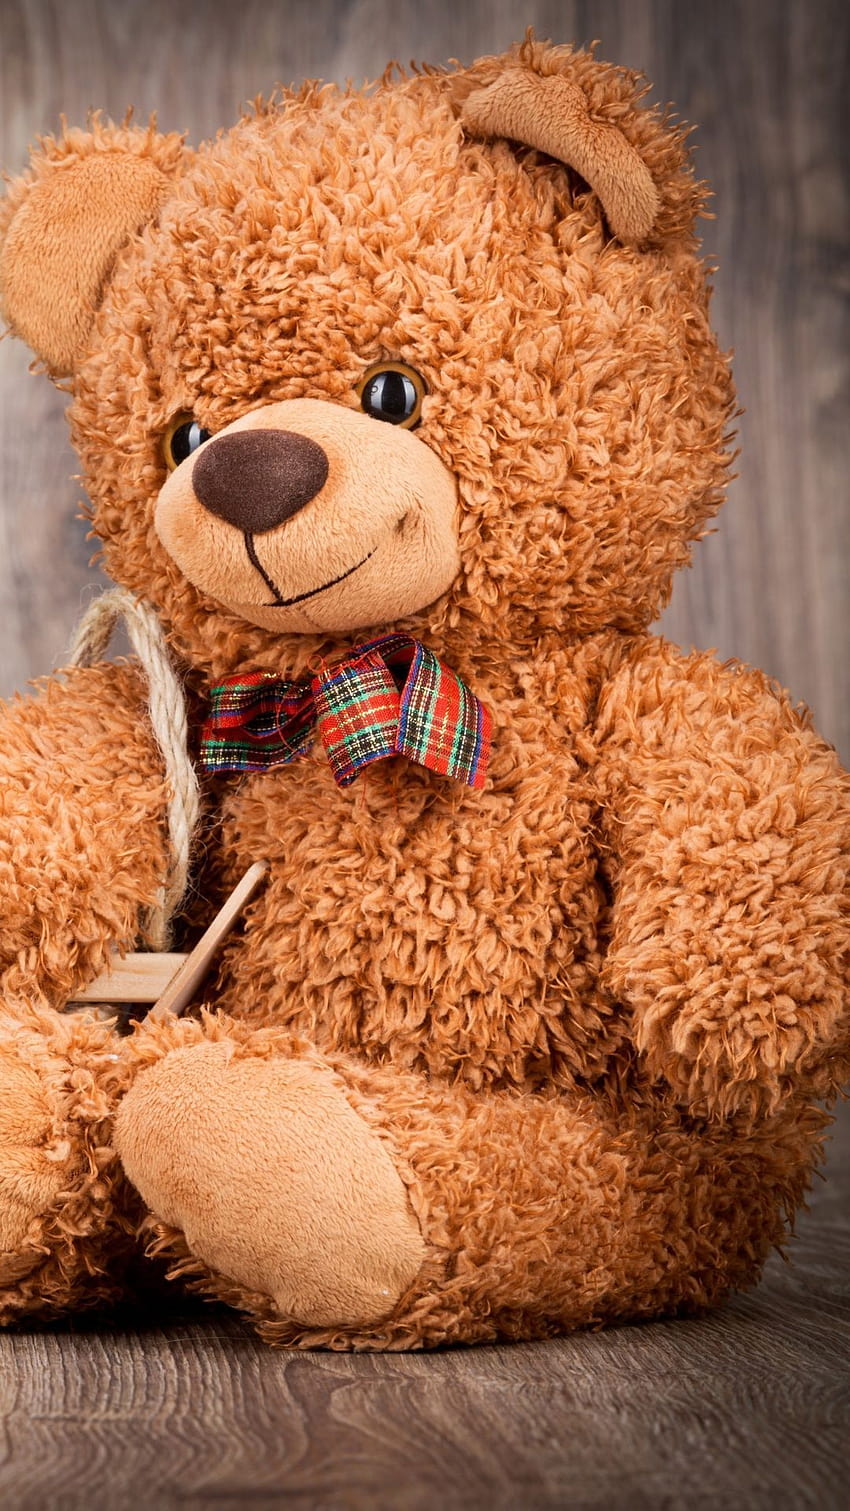 couple teddy bear pics in 2020, share toys HD phone wallpaper